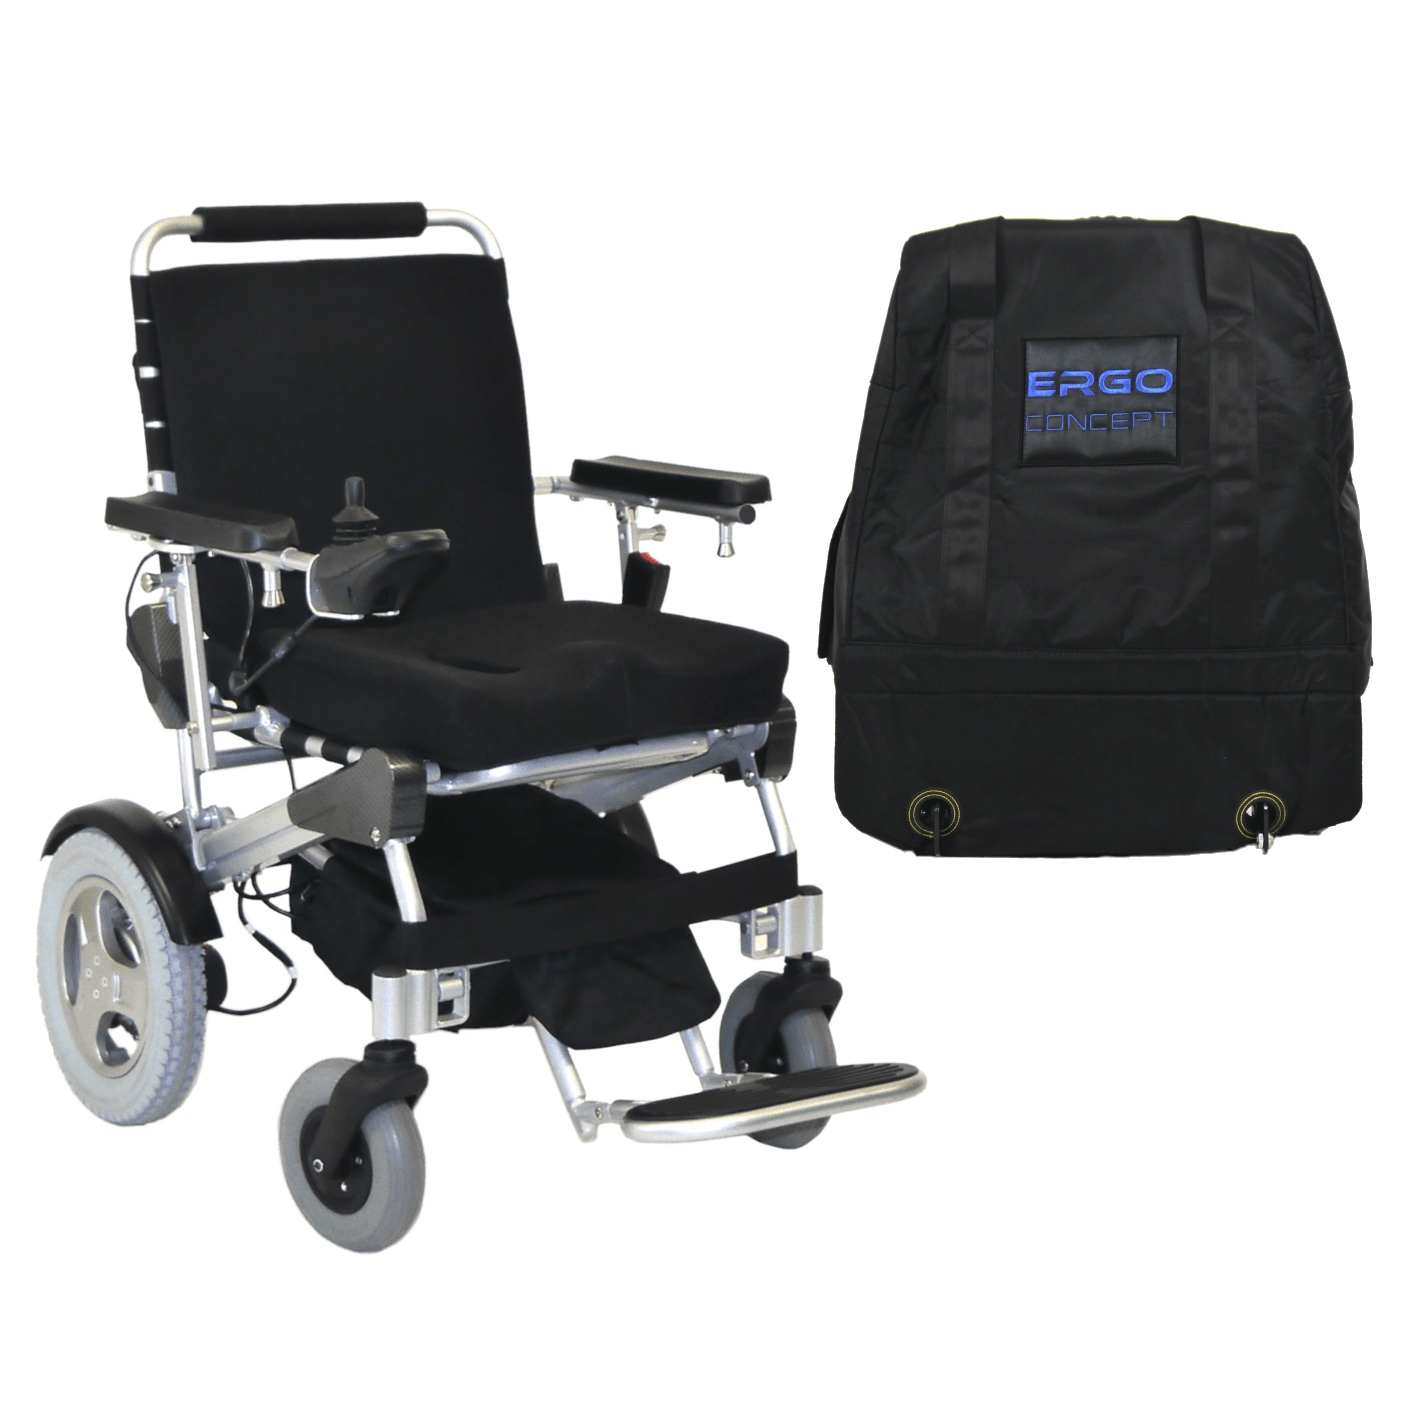 Ergo 09L Compact - electric foldable wheelchair